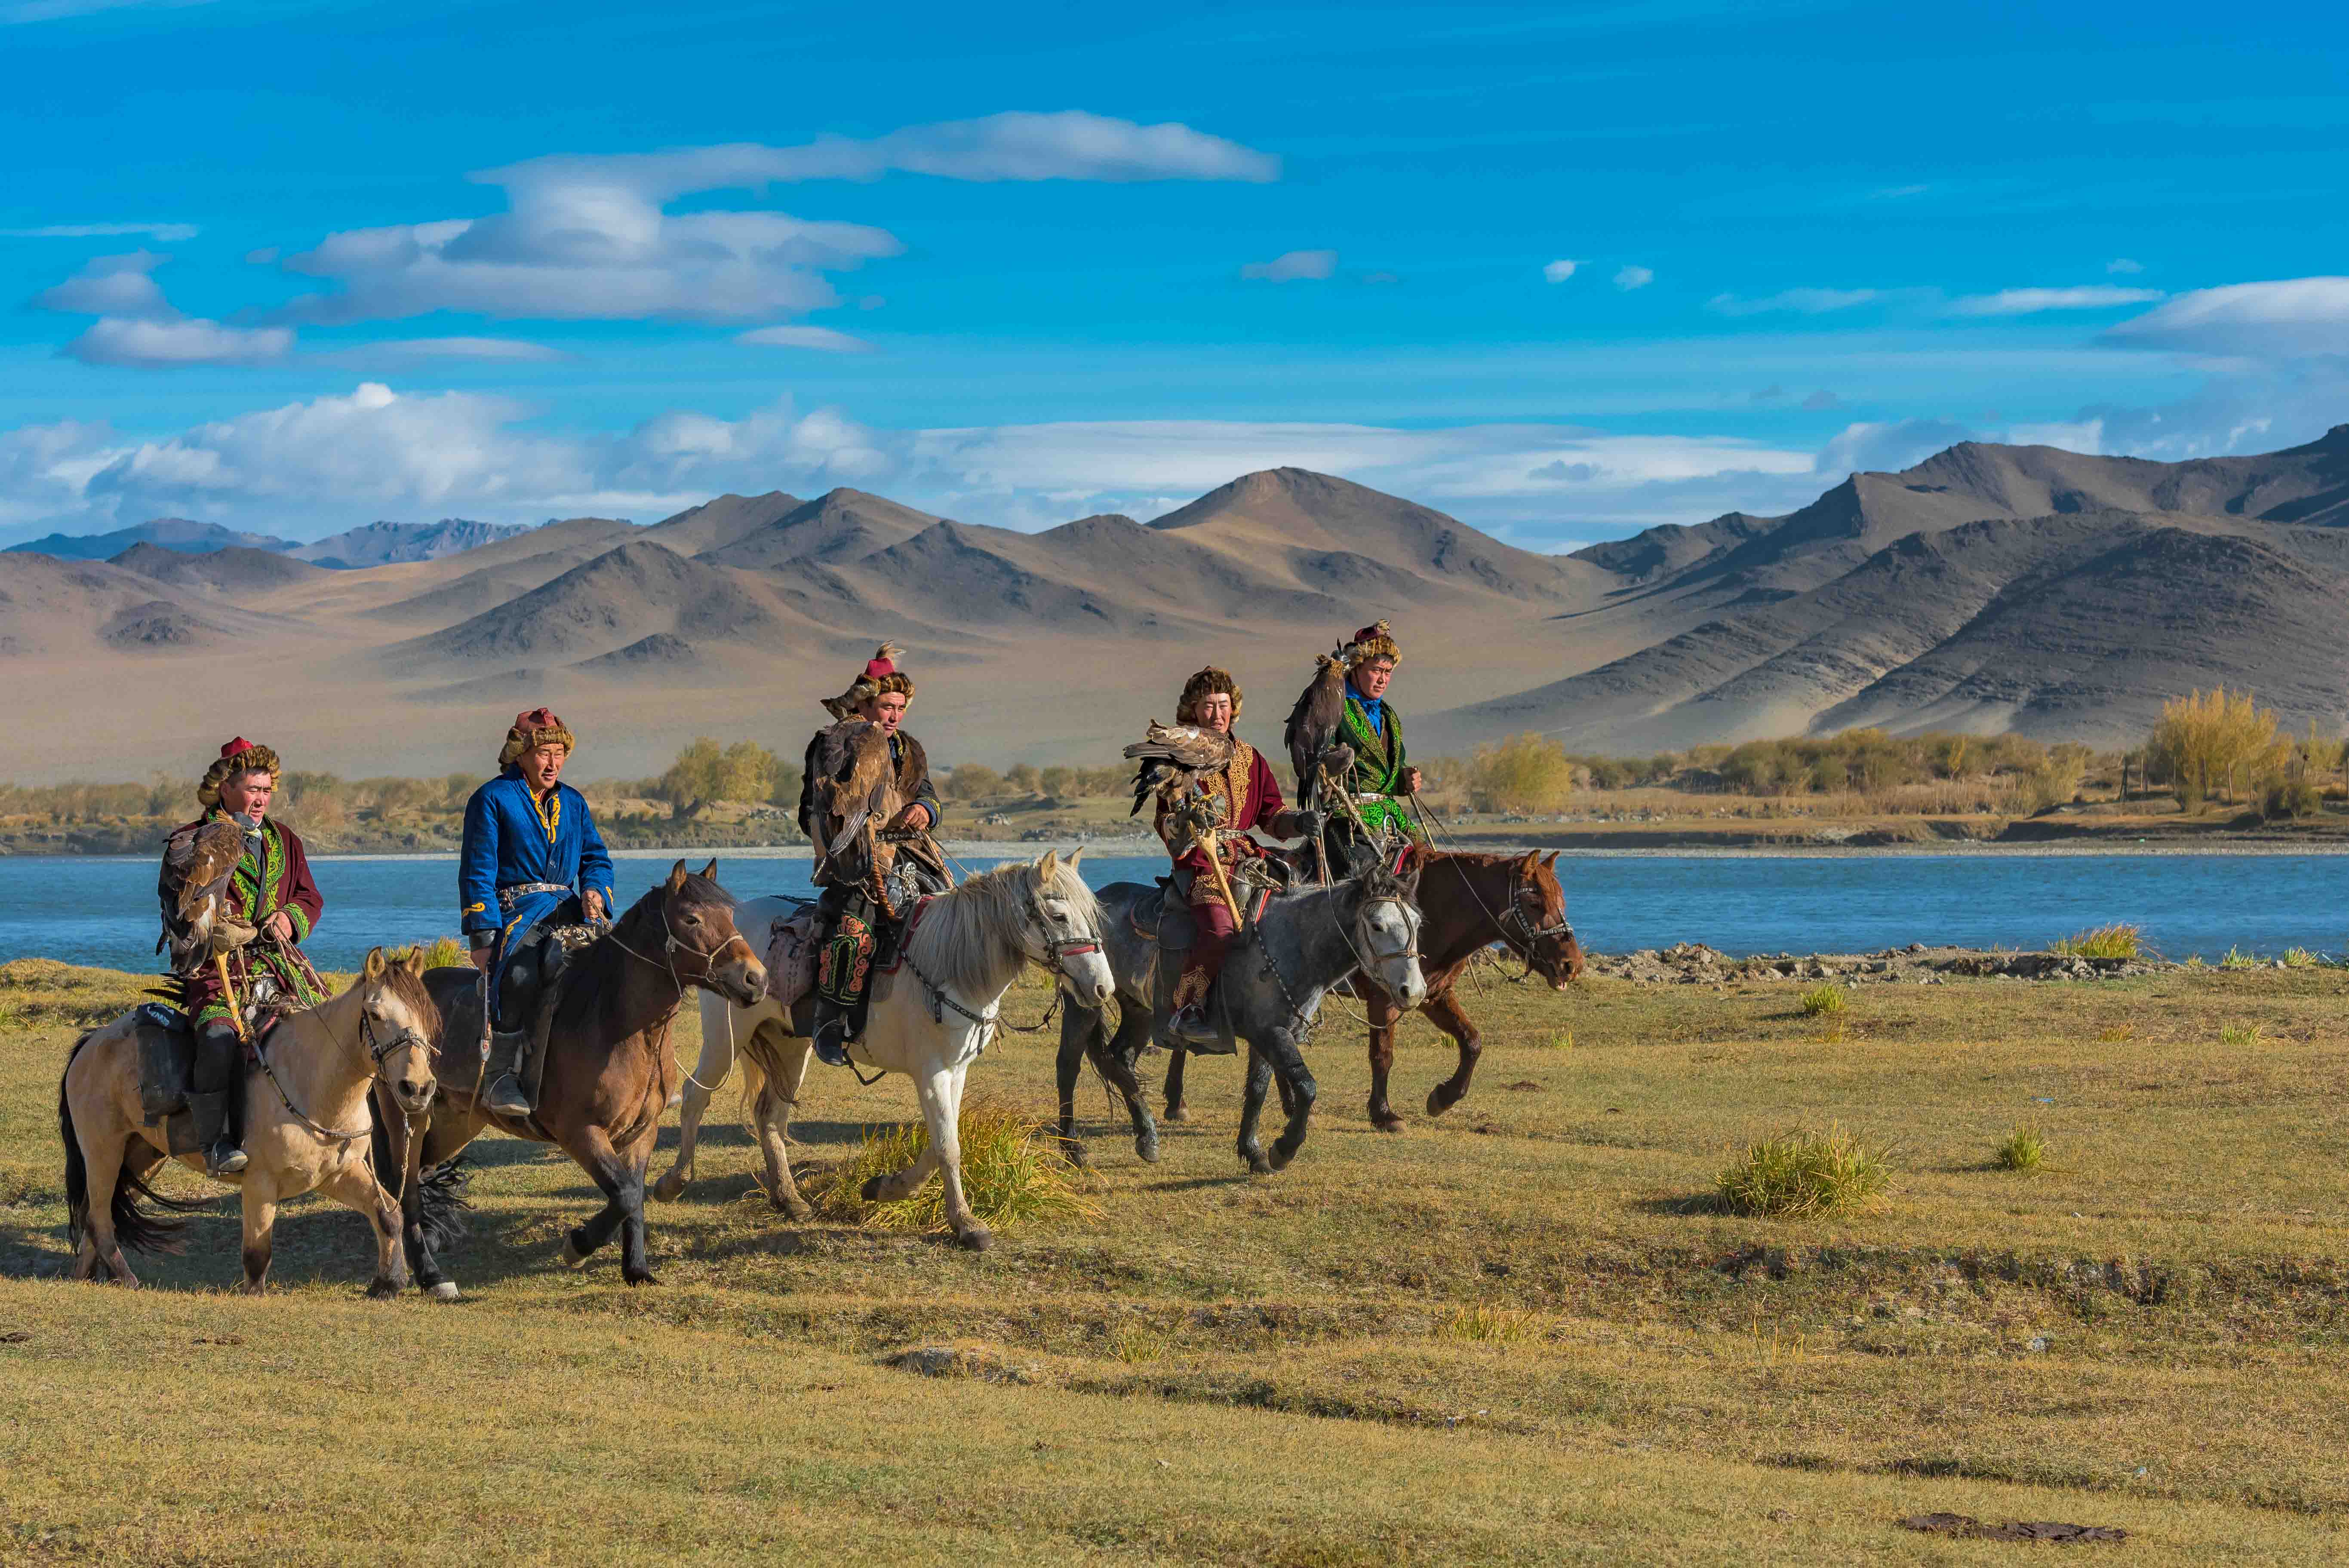 Golden Eagle hunters from up to 200 km away in Mongolia, Russia and Kazakhstan arrive on horseback with nothing more than their eagle and the clothes on their backs.